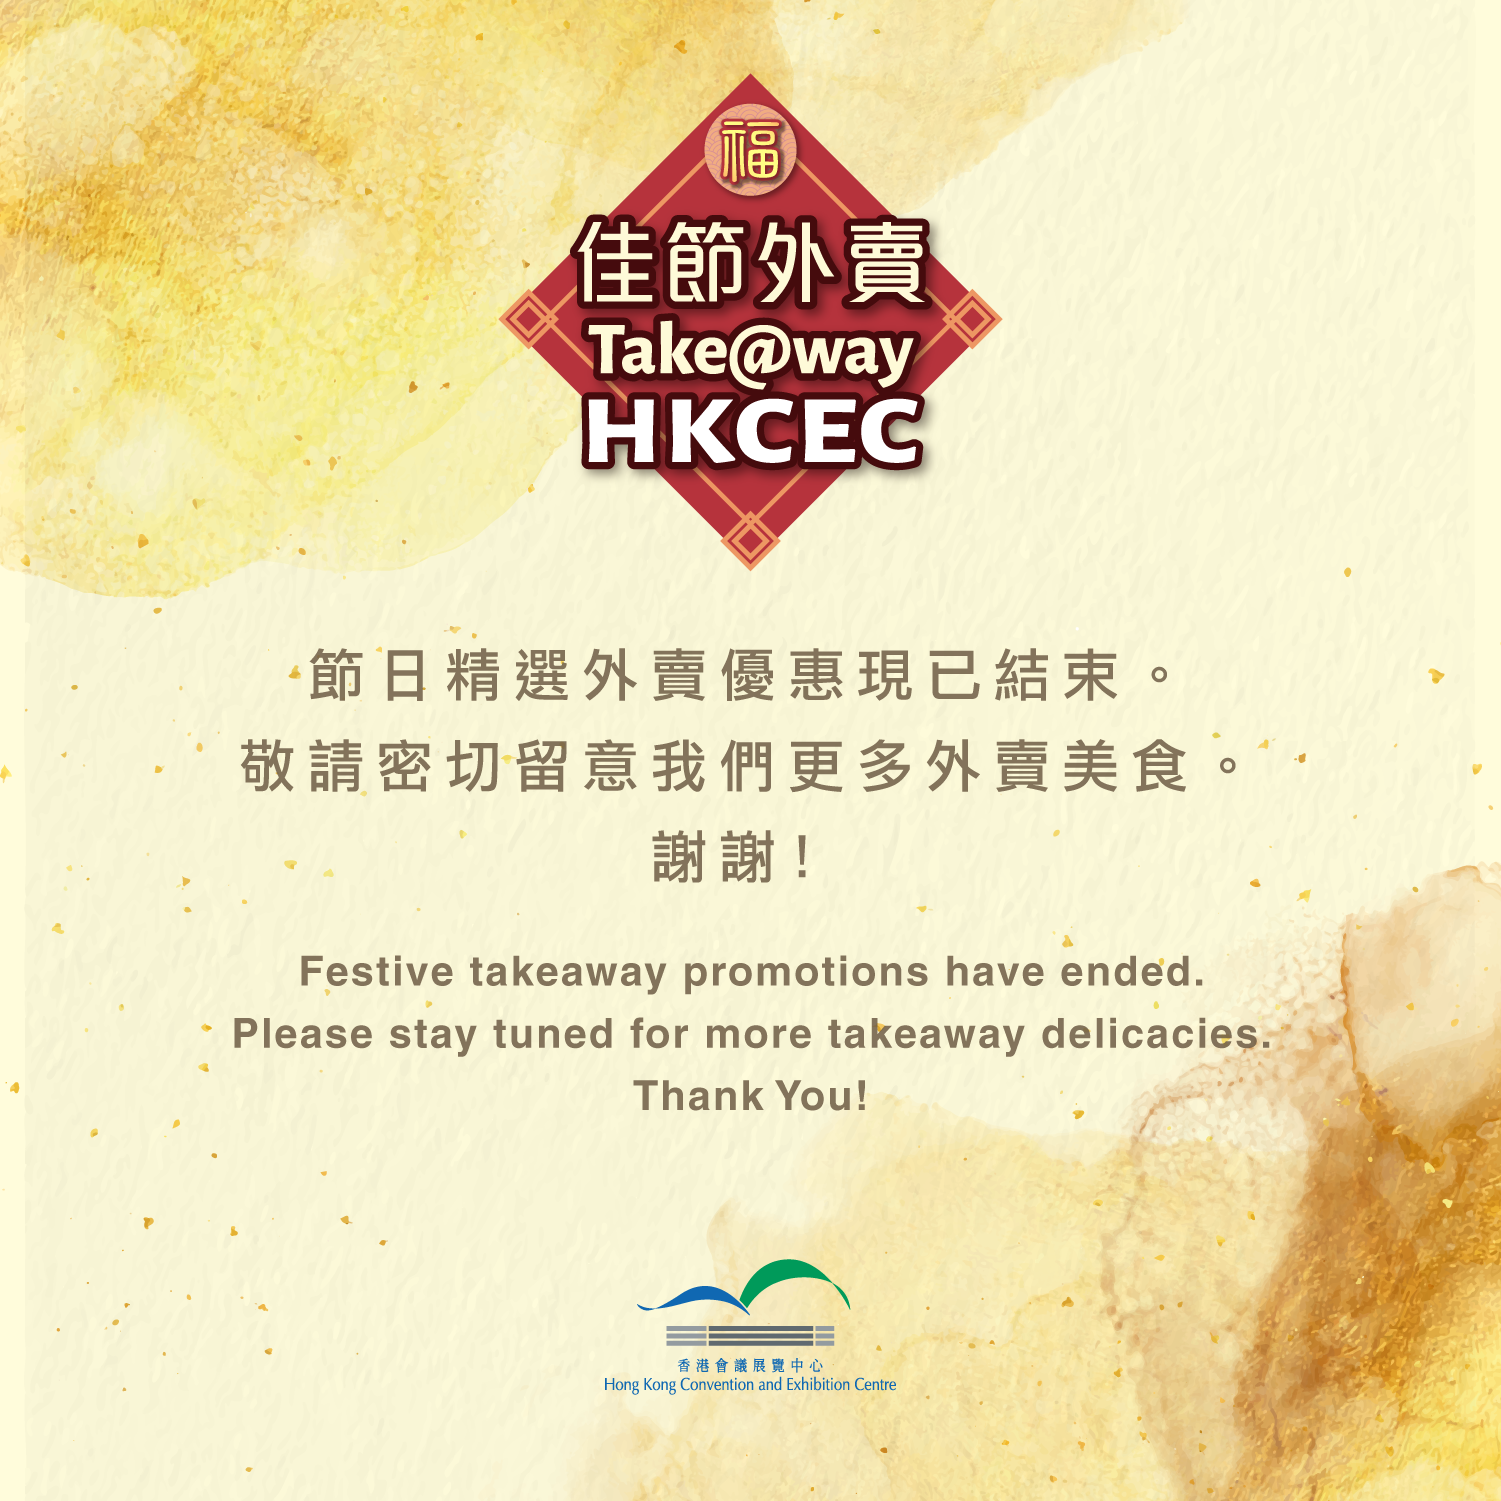 Festive takeaway promotions have ended. Please stay tuned for more takeaway delicacies. Thank You!